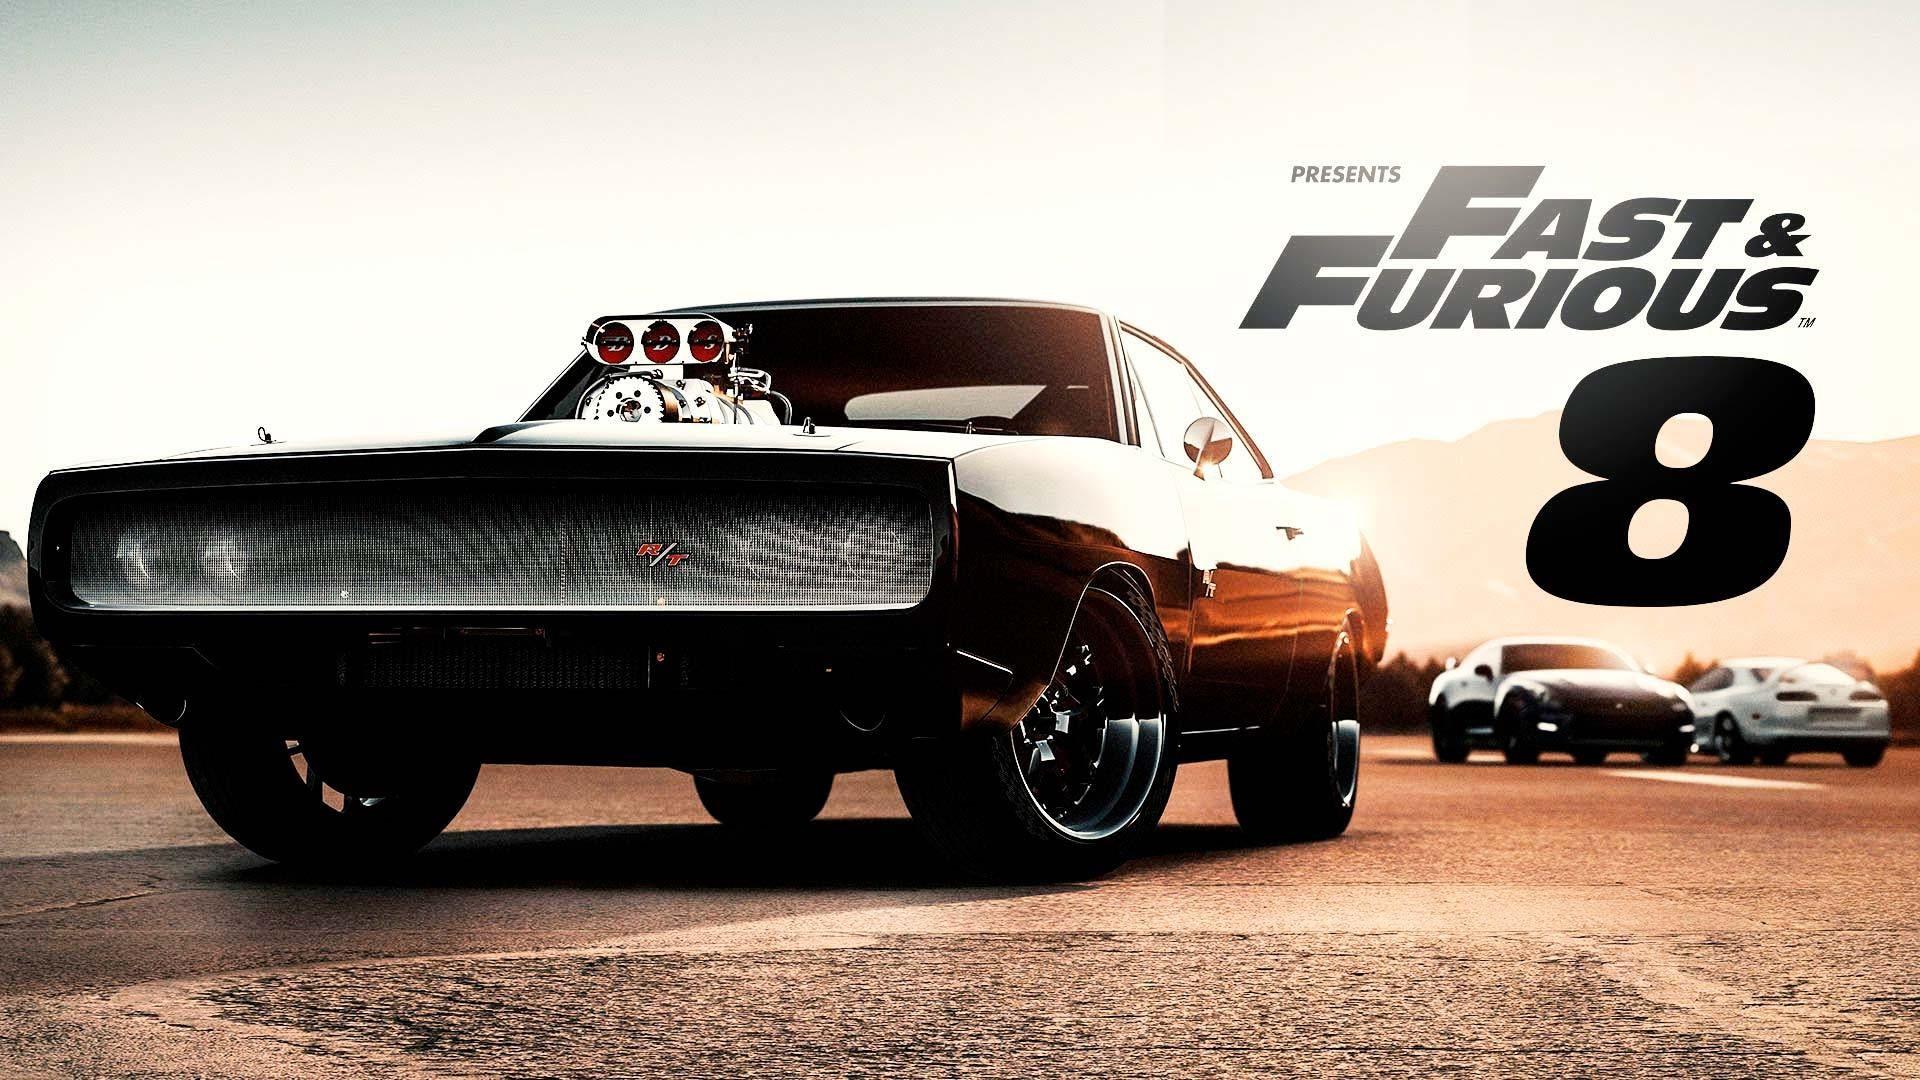 Fast And Furious Cars Wallpaper Wallpaper. Fast and furious, The furious, Fate of the furious